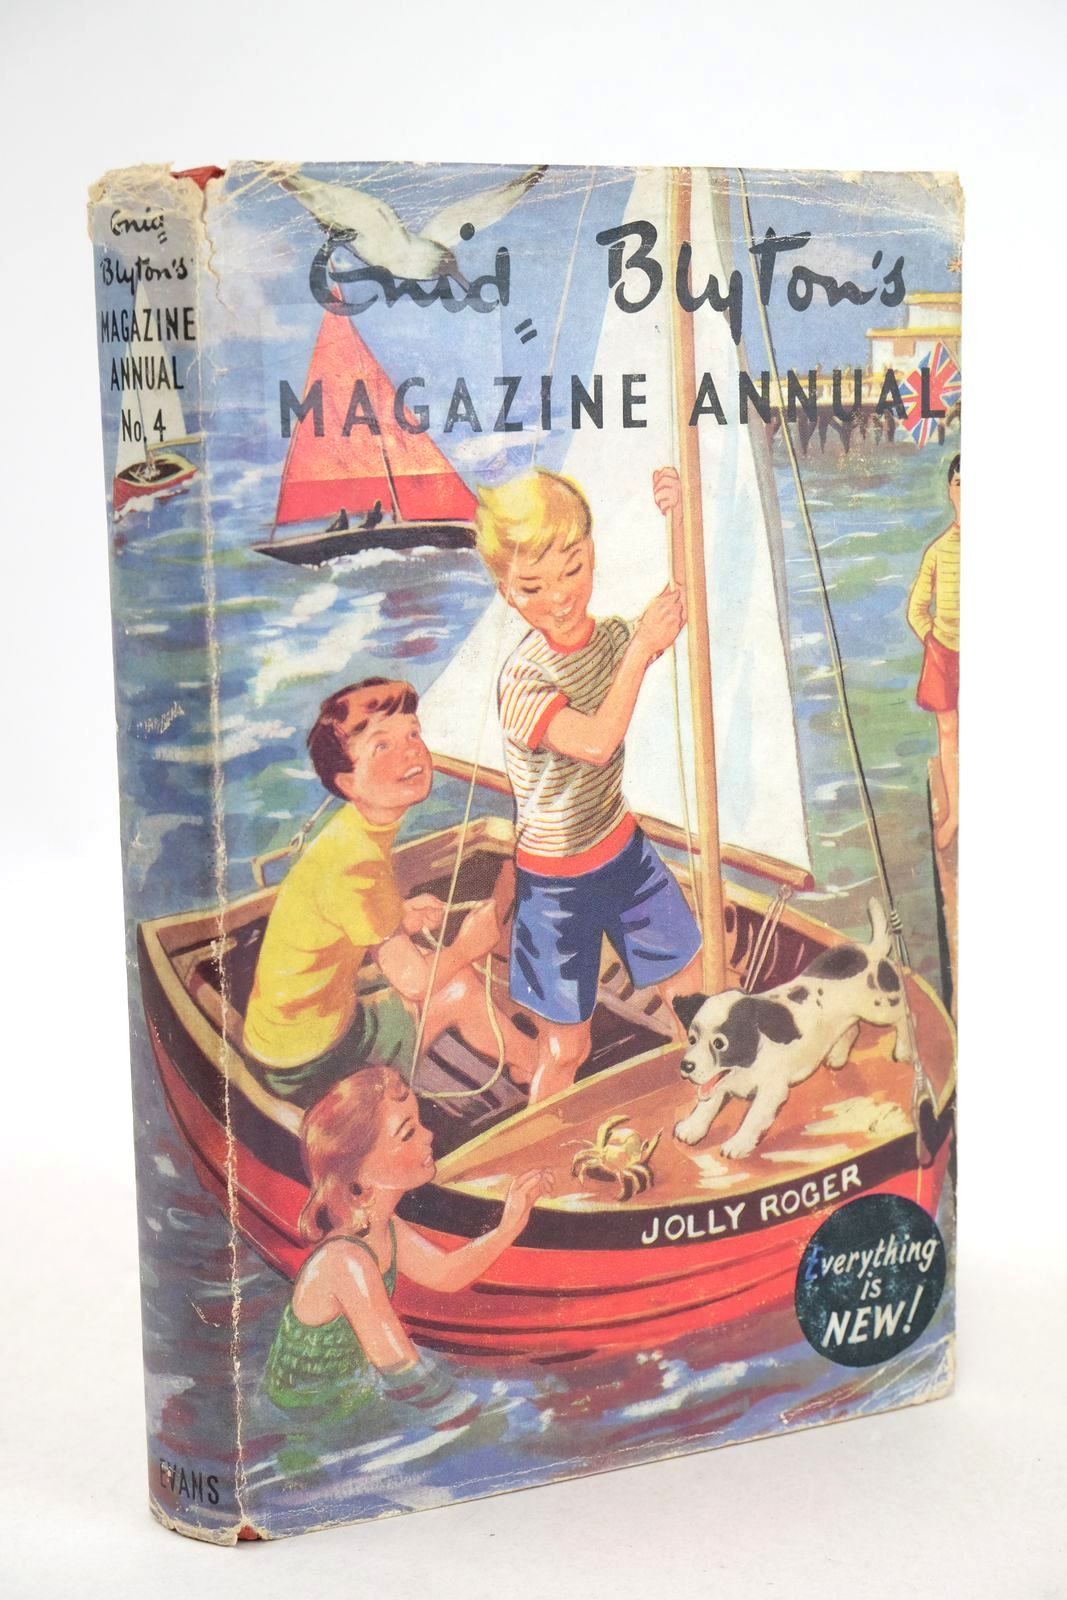 Photo of ENID BLYTON'S MAGAZINE ANNUAL No. 4- Stock Number: 1325935